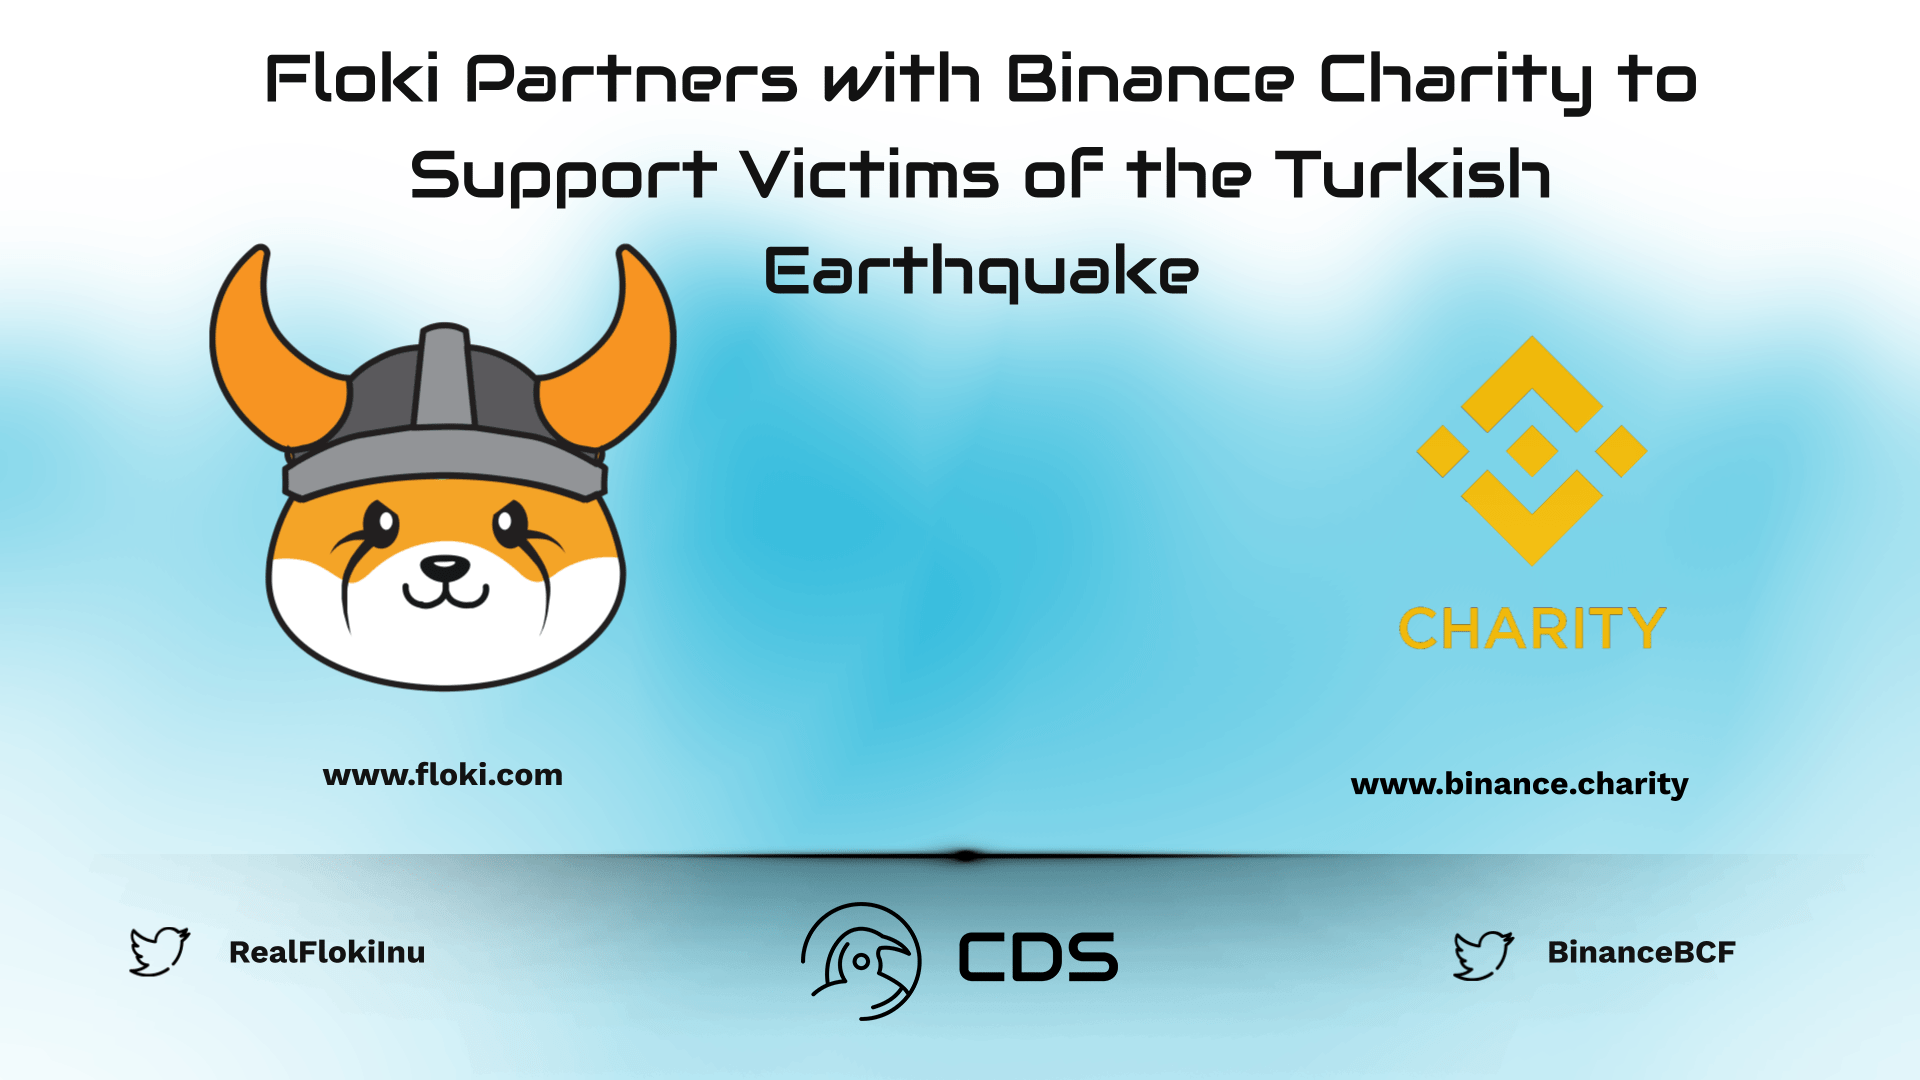 Floki Partners with Binance Charity to Support Victims of the Turkish Earthquake